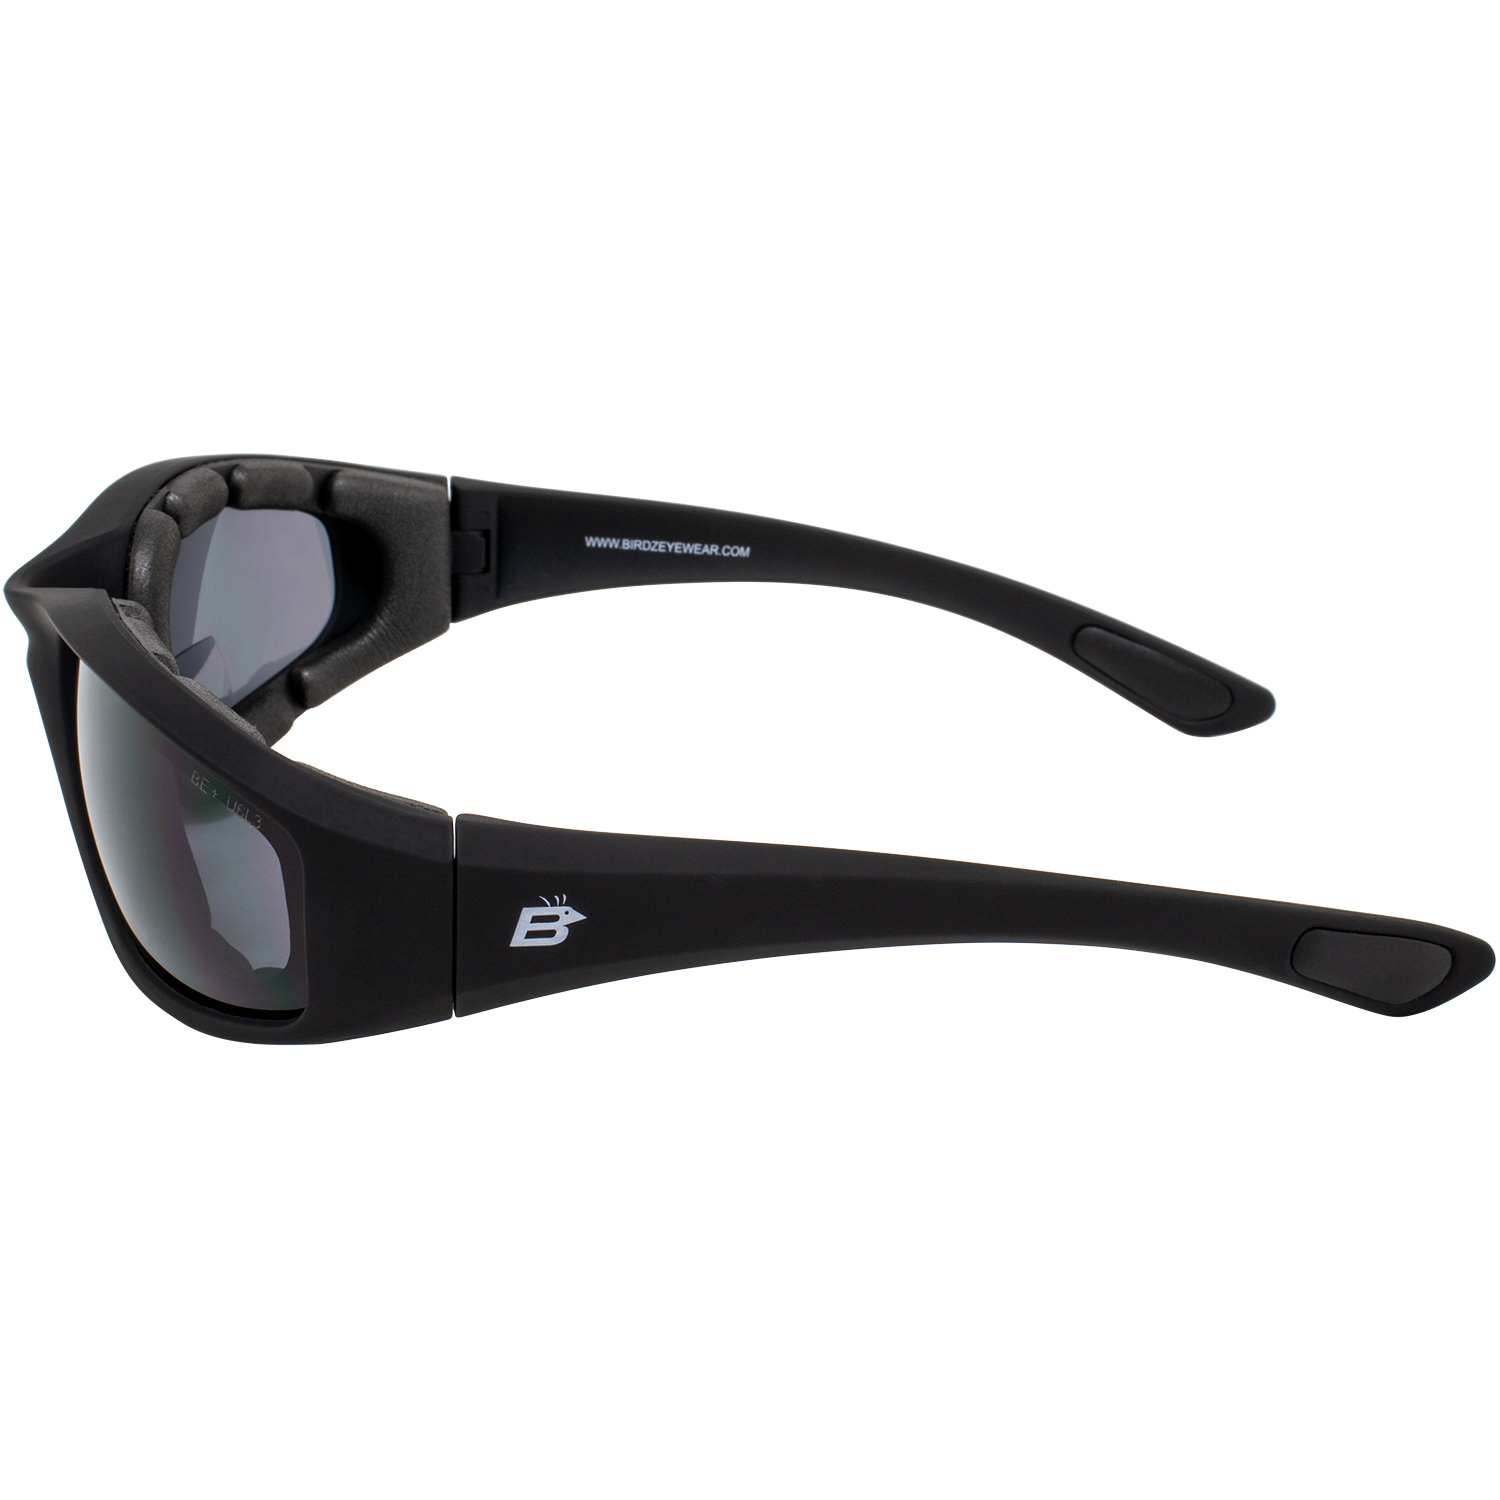 2 Pairs of Birdz Oriole Bifocal Safety Sunglasses Black Frames 2.0X with Smoke & Yellow Lenses - image 3 of 8